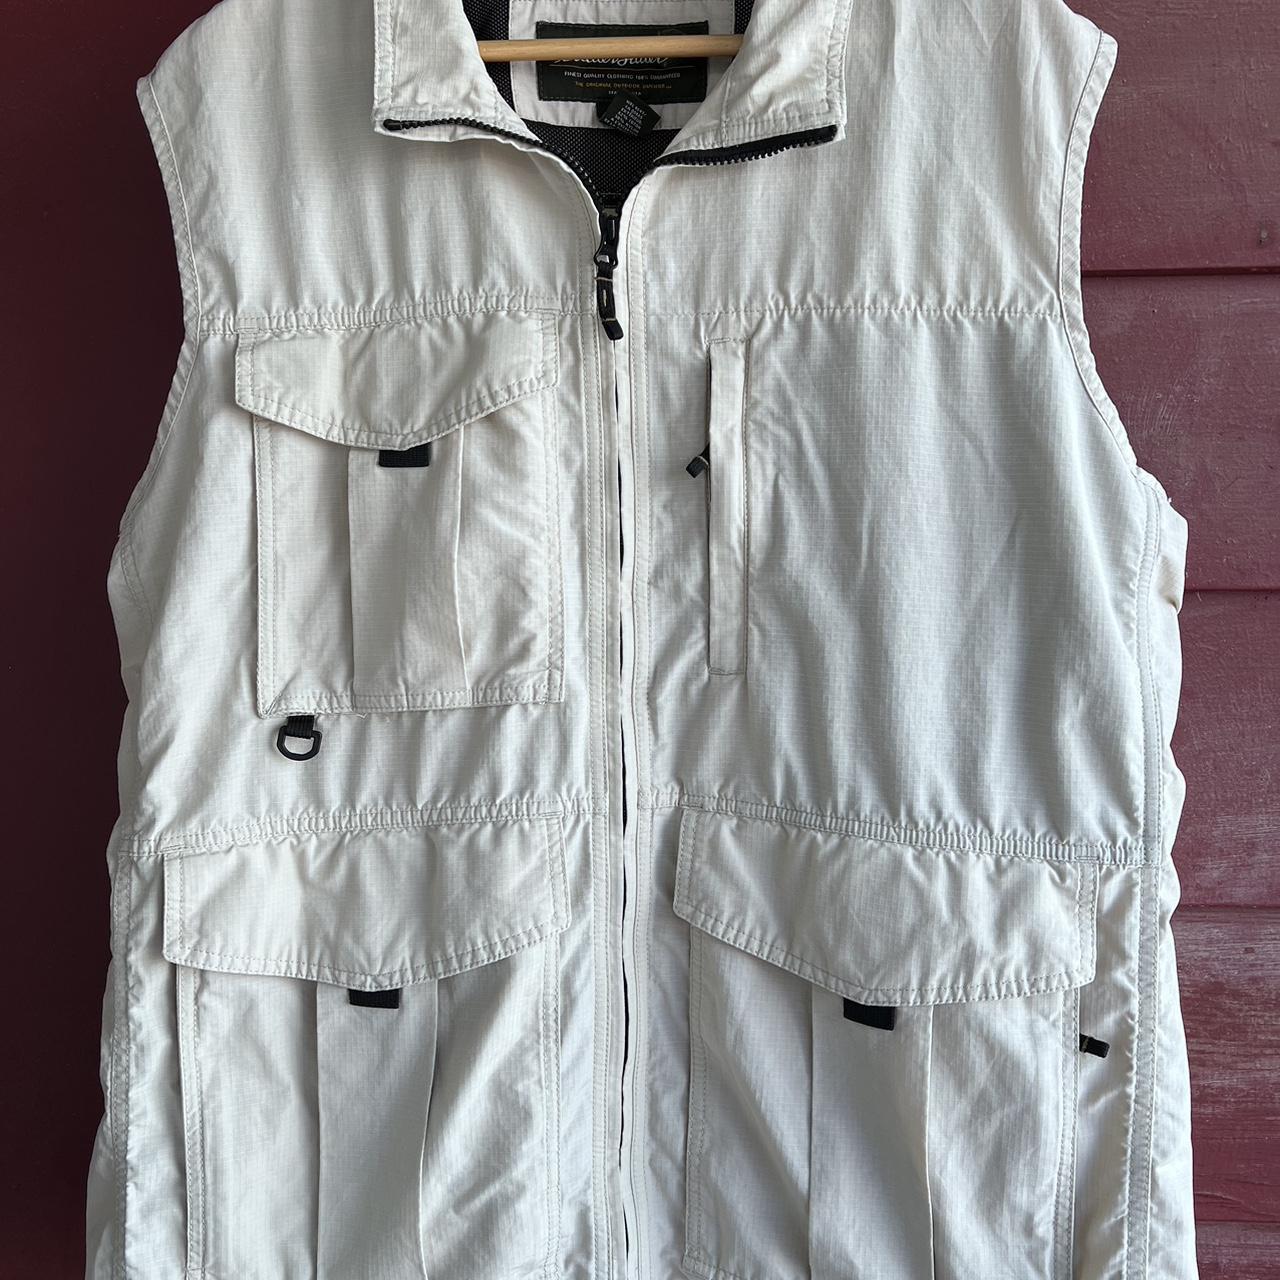 Vintage ll bean fishing vest , Lots of pockets and